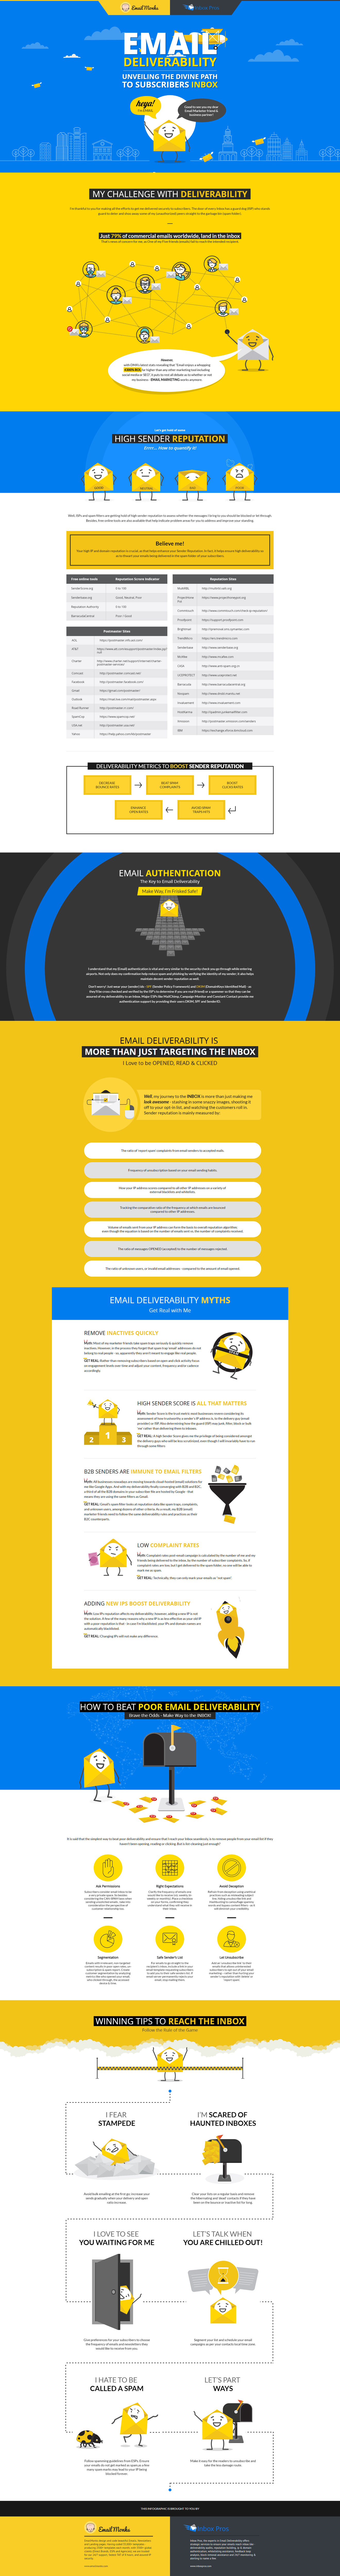 EMAIL-DELIVERABILITY- Infographic